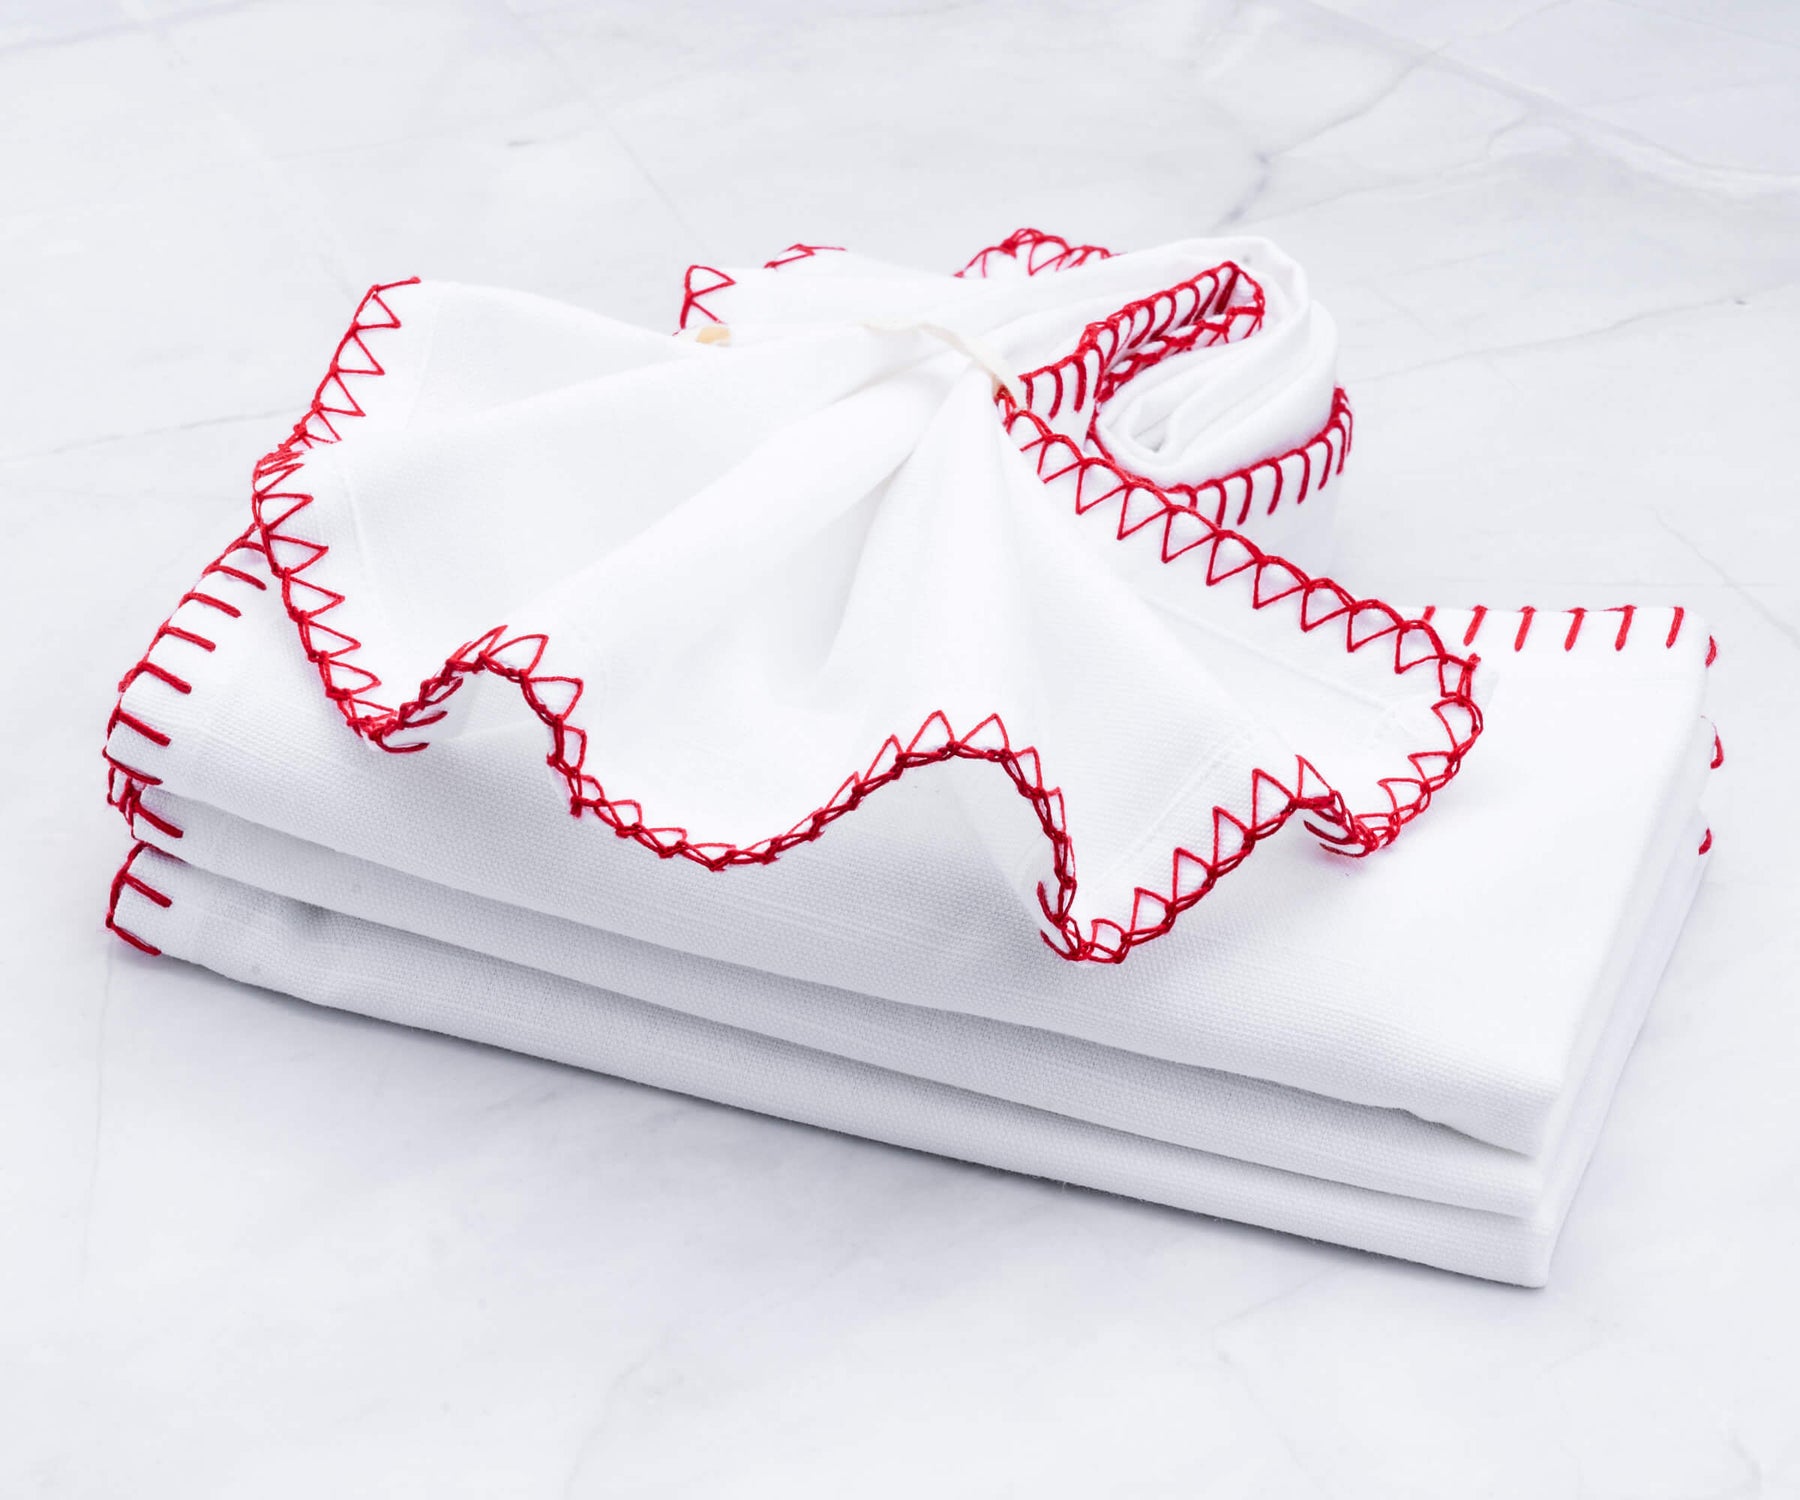 Pile of shell edge cloth napkins with red detailing